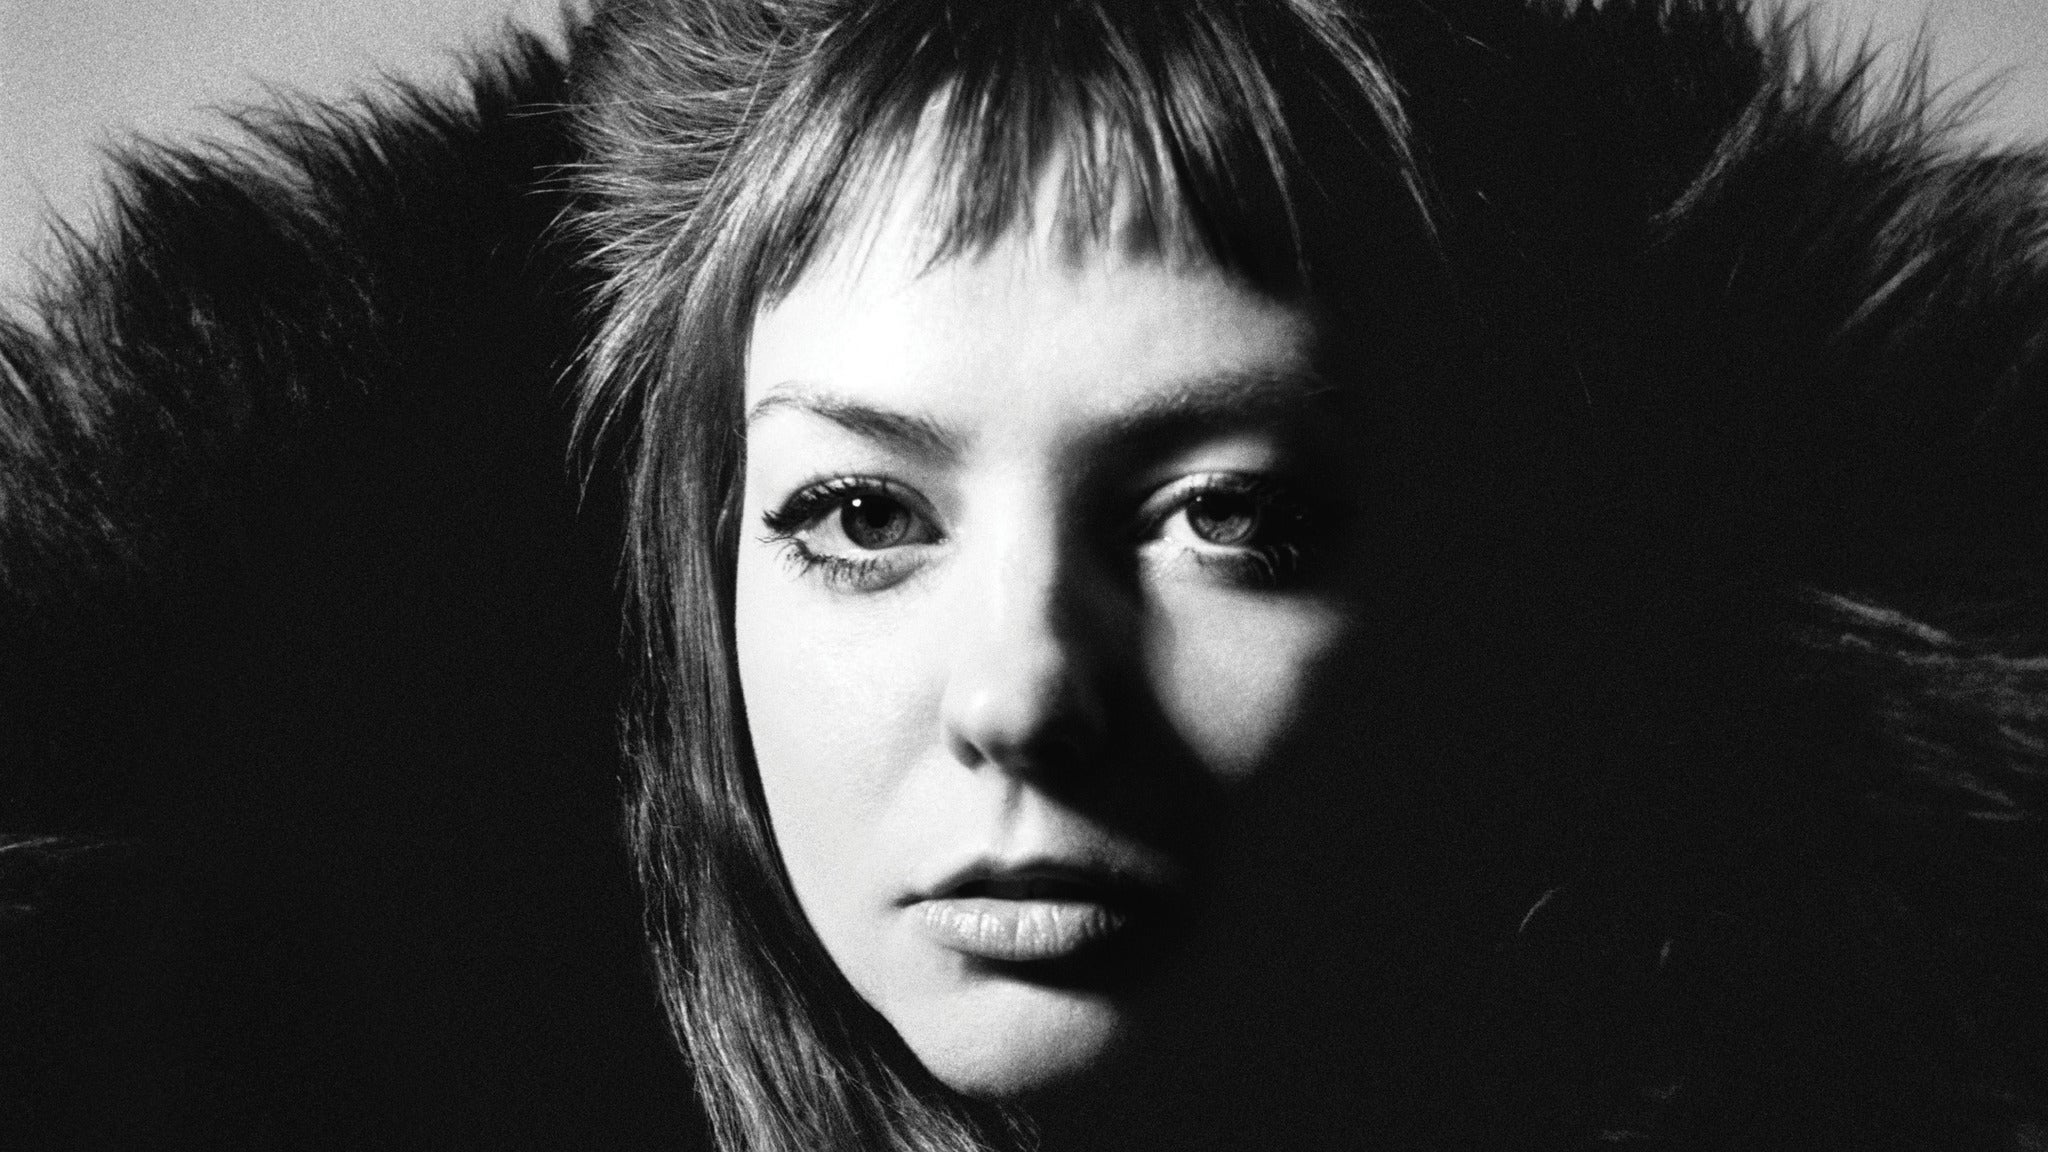 Image used with permission from Ticketmaster | Angel Olsen with Joanna Sternberg Presented by 93XRT tickets